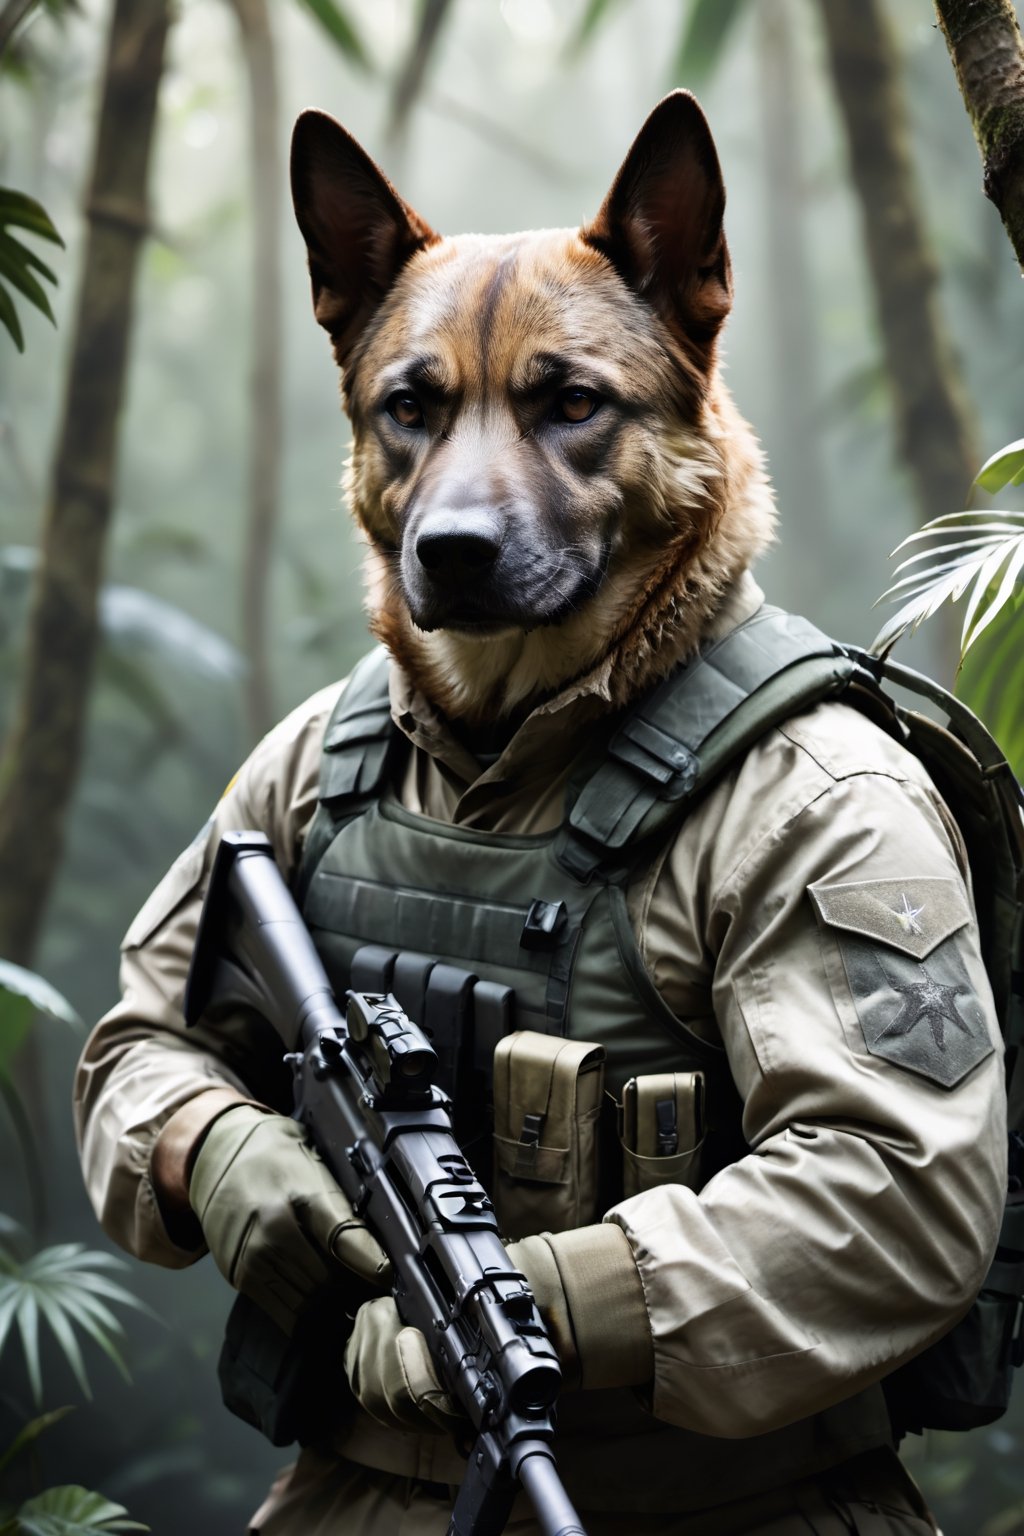 soldier with a dog face, soldier with rifle, camouflage clothing, tactical gloves, background of the image a jungle, medium shot, medium view